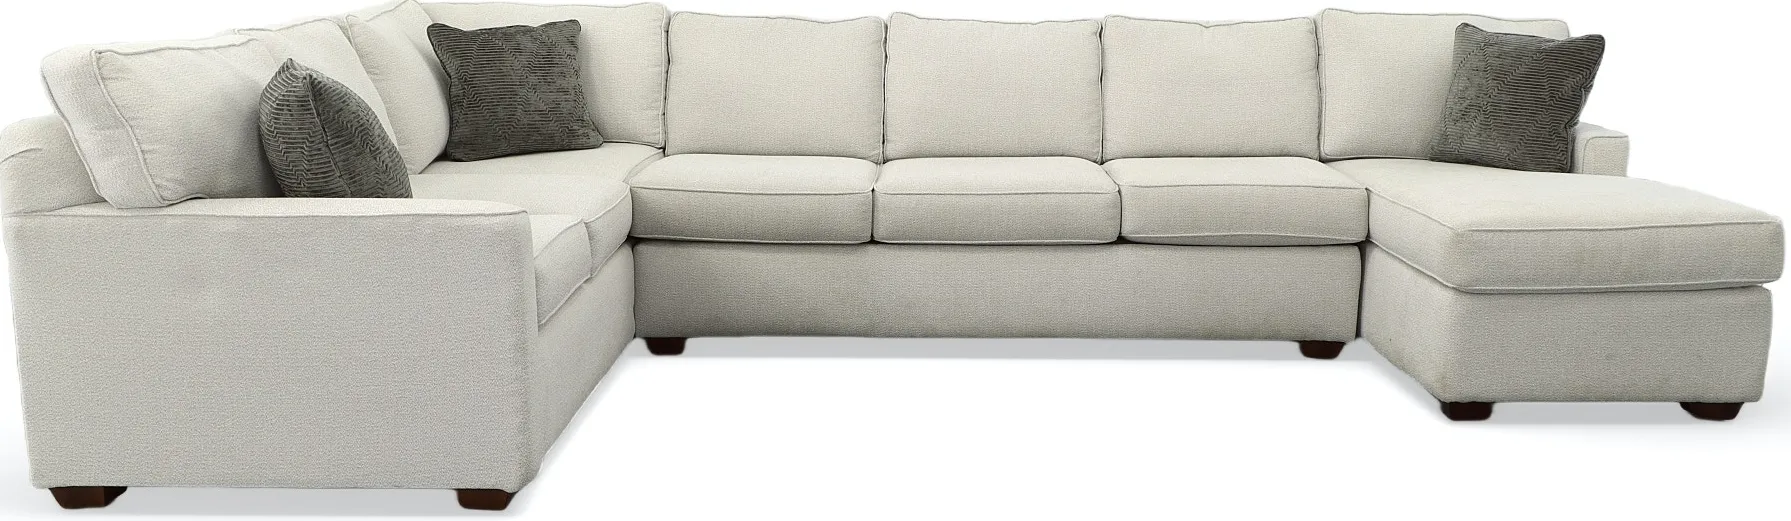 Klaussner PANTEGO IV 3 PIECE CHAISE SECTIONAL